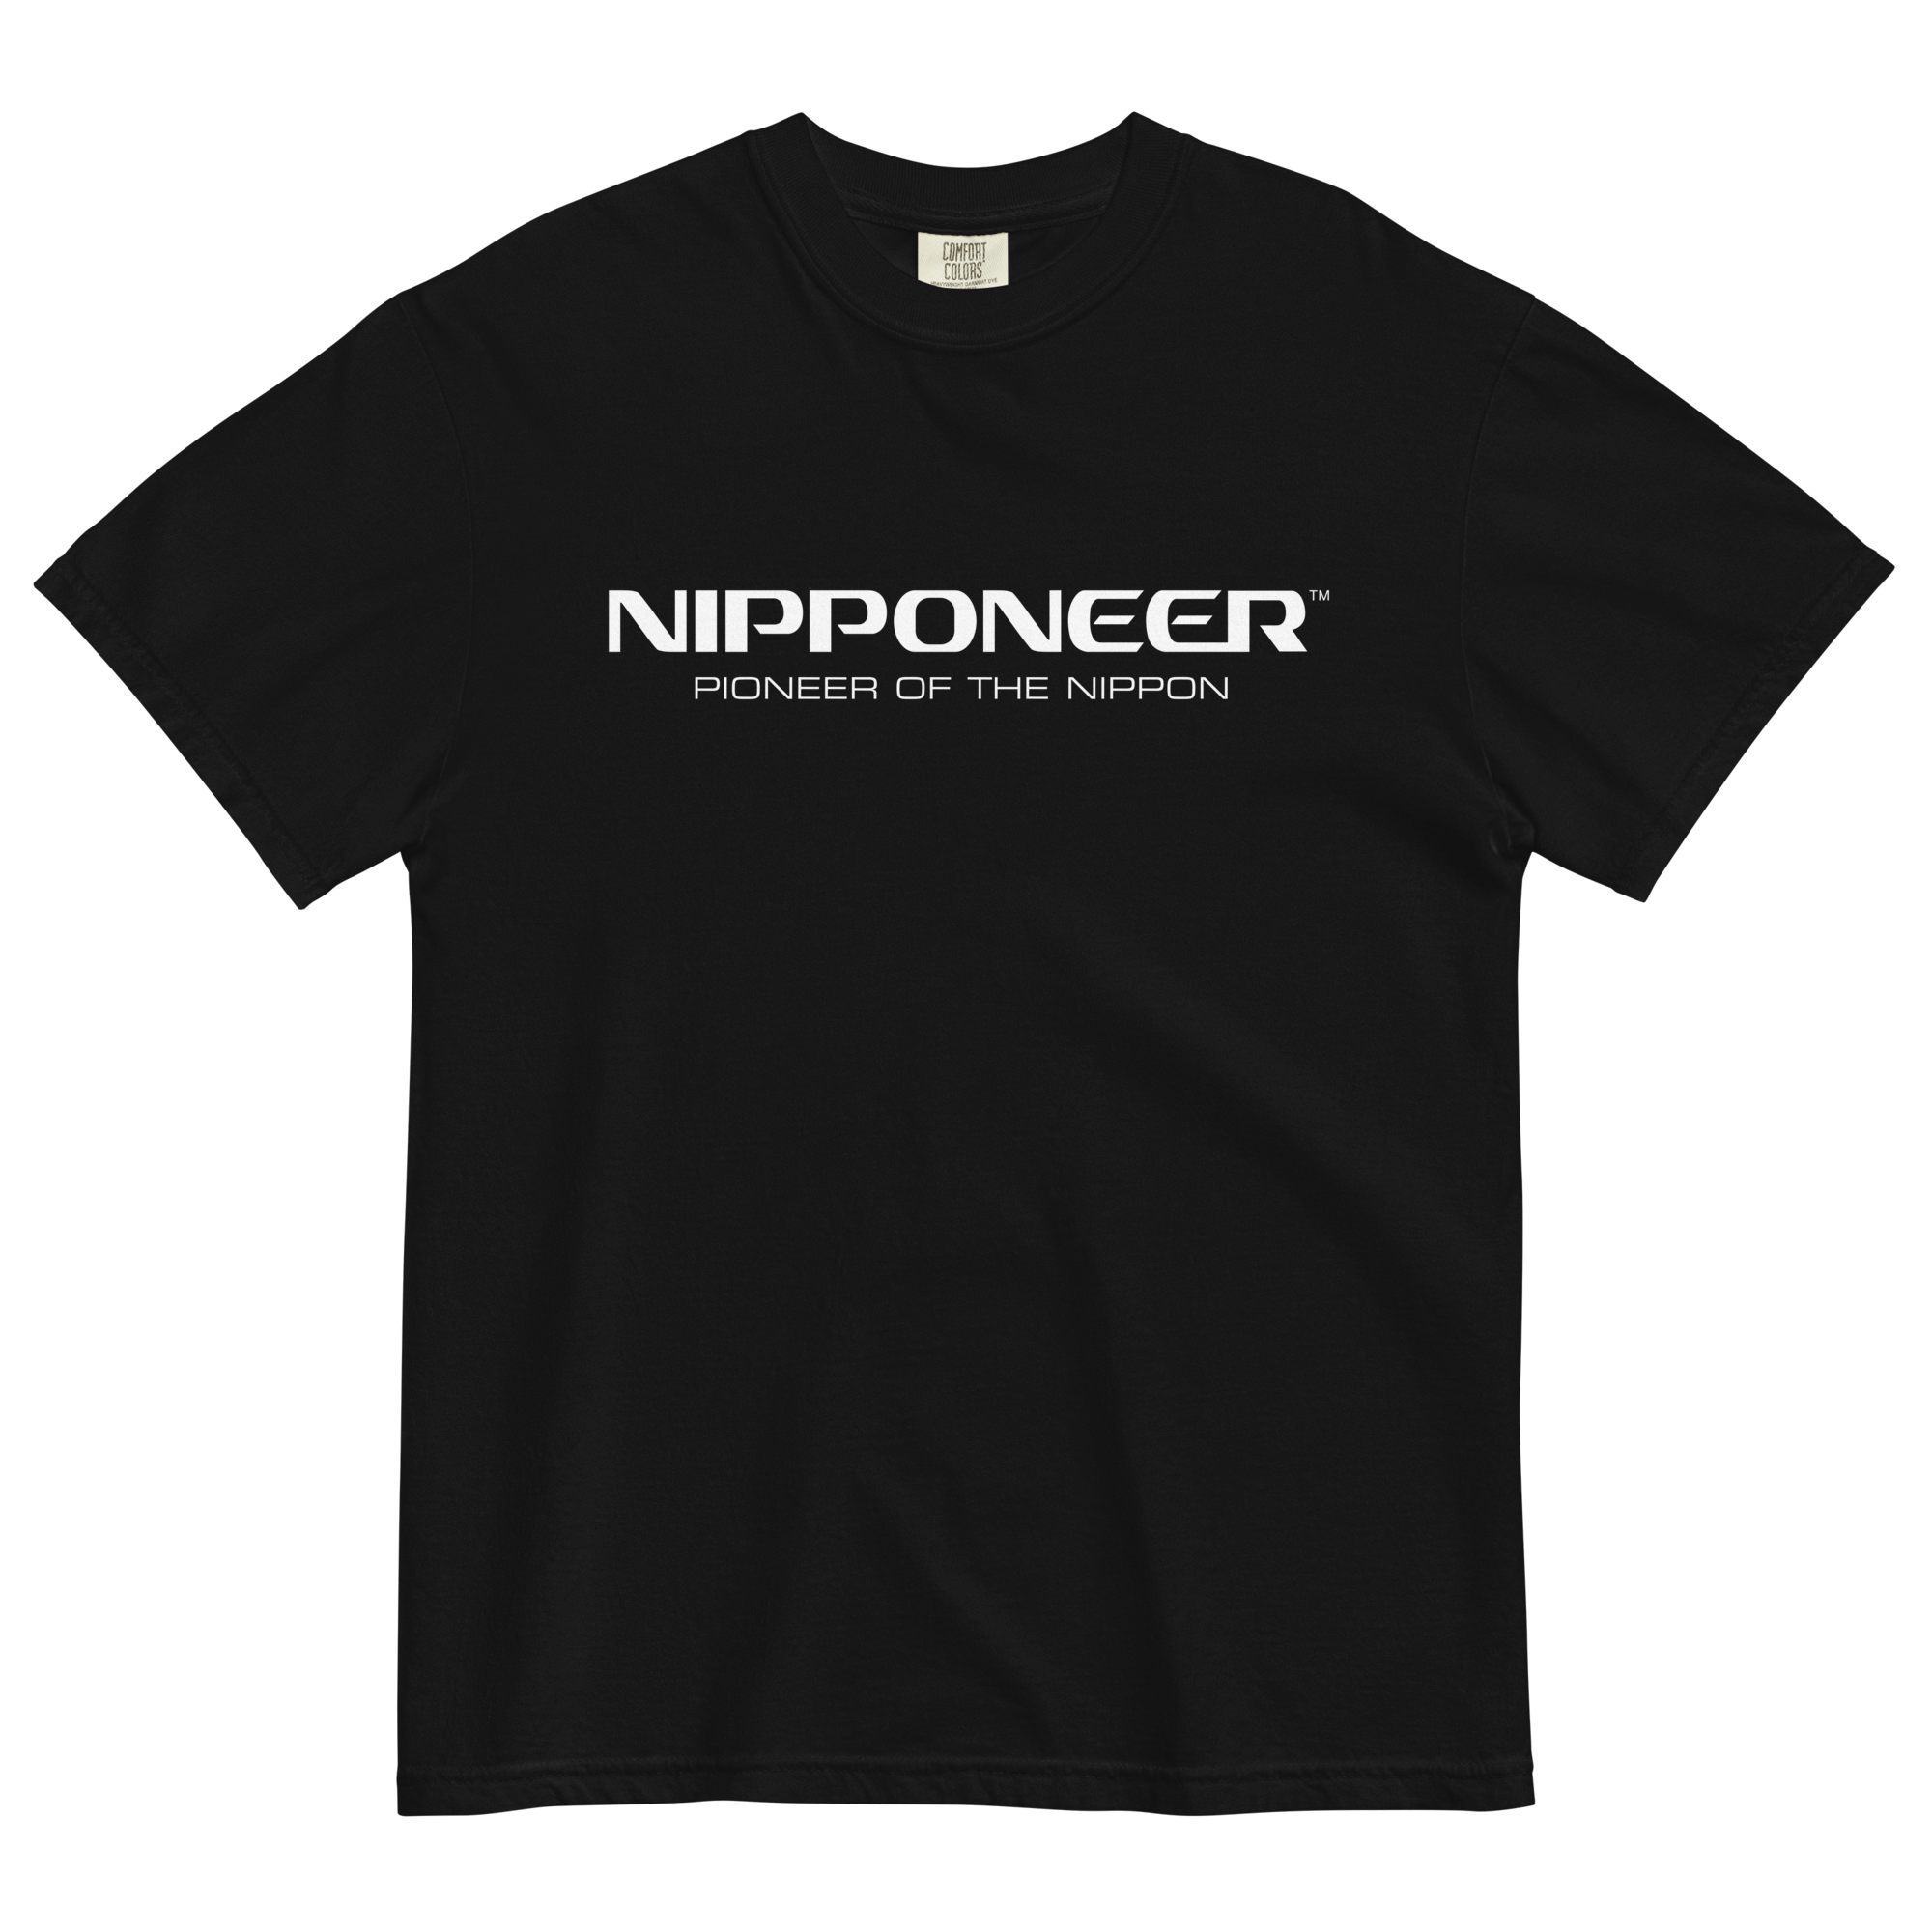 Nipponeer Records T-shirtGrab the cozy Nipponeer Records T-shirt! Ideal fit, durability, and serious style – your edgy wardrobe staple awaits. Secure yours now! Crafted exclusively for you upon order, it takes a bit more time, but trust us, it's worth it.